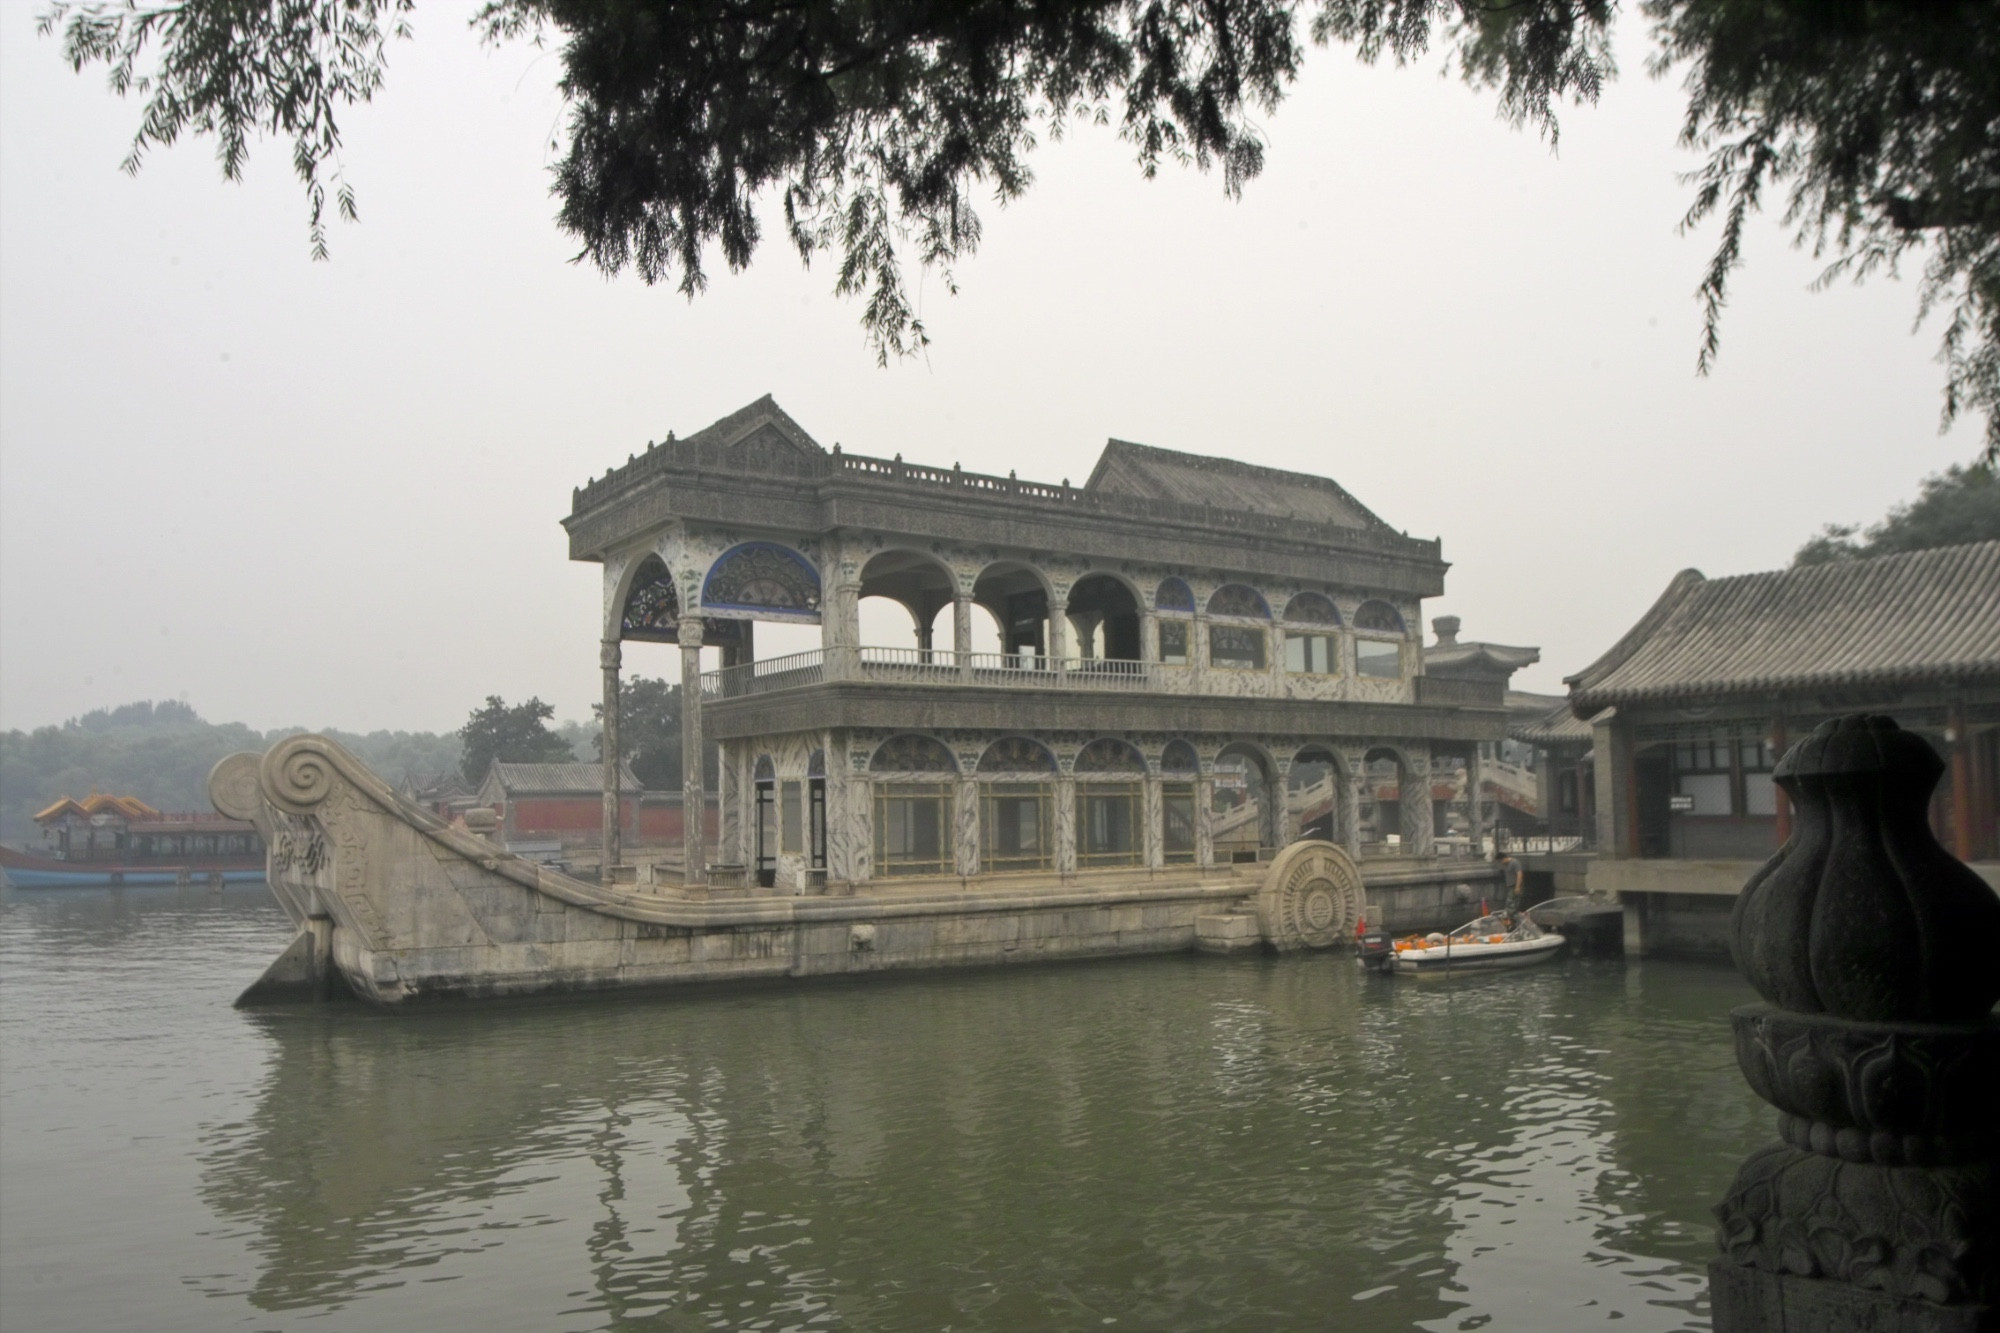 The Marble Boat